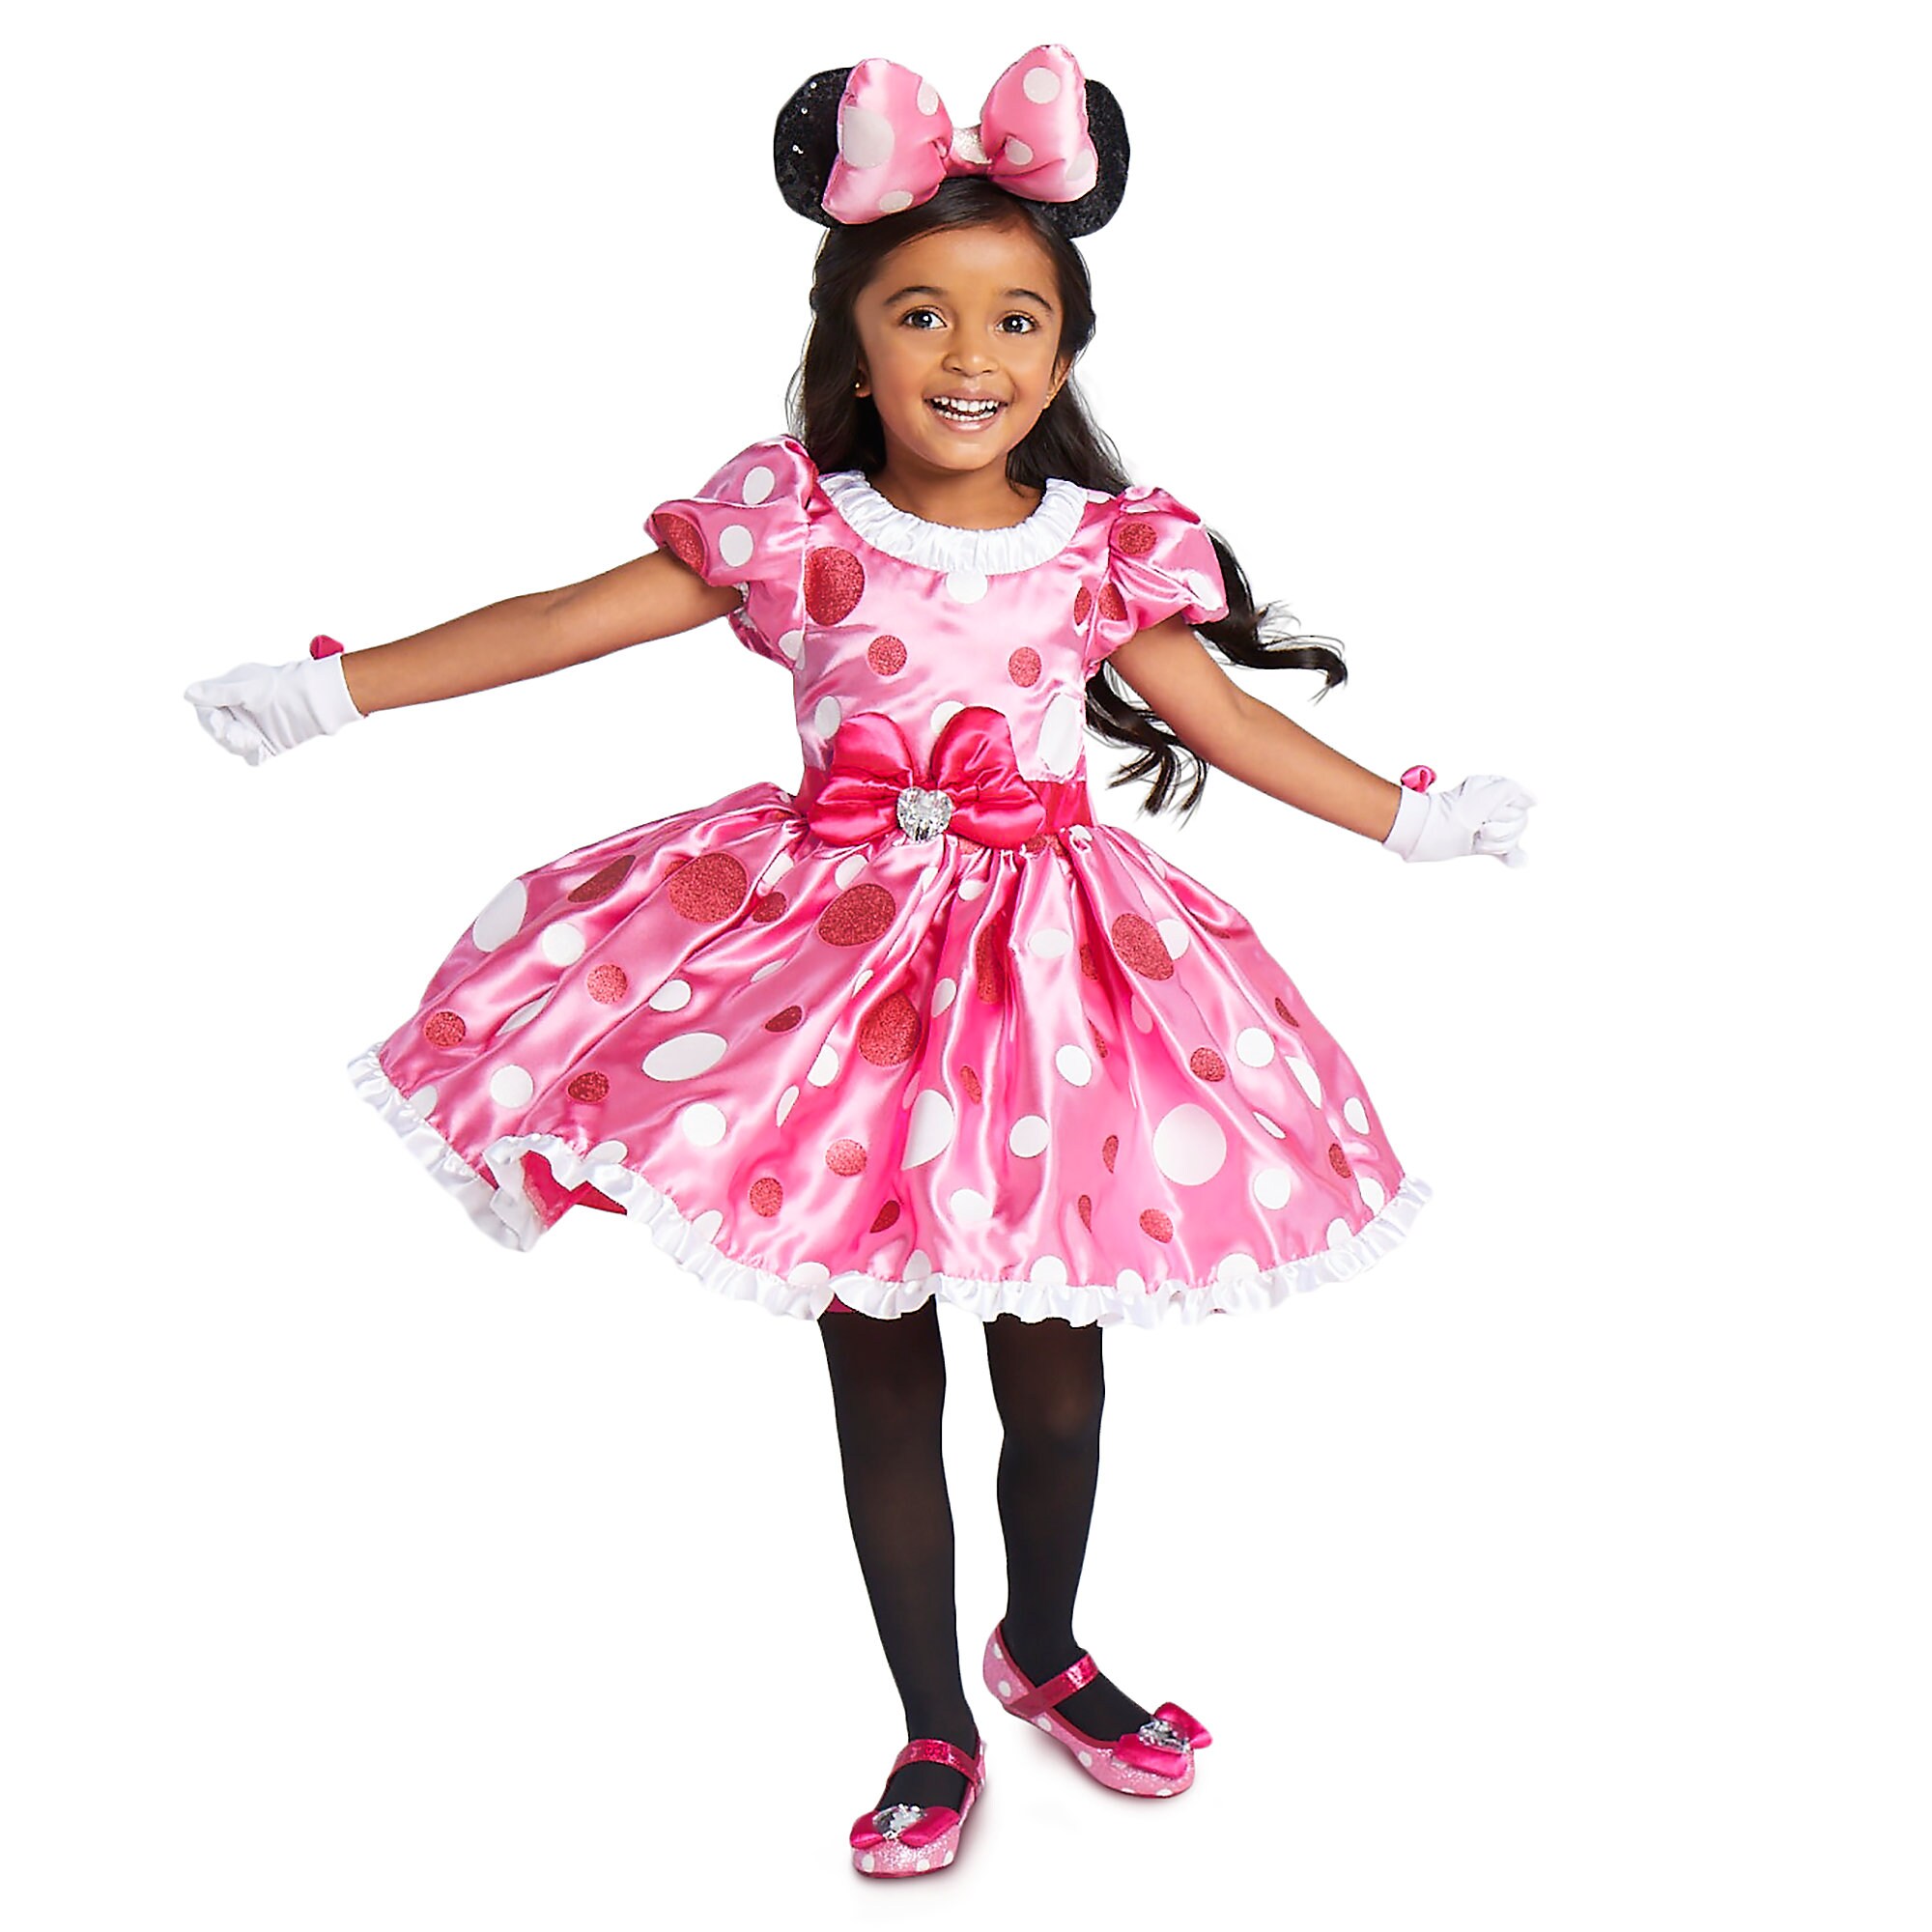 Minnie Mouse Pink Dress Costume for Kids